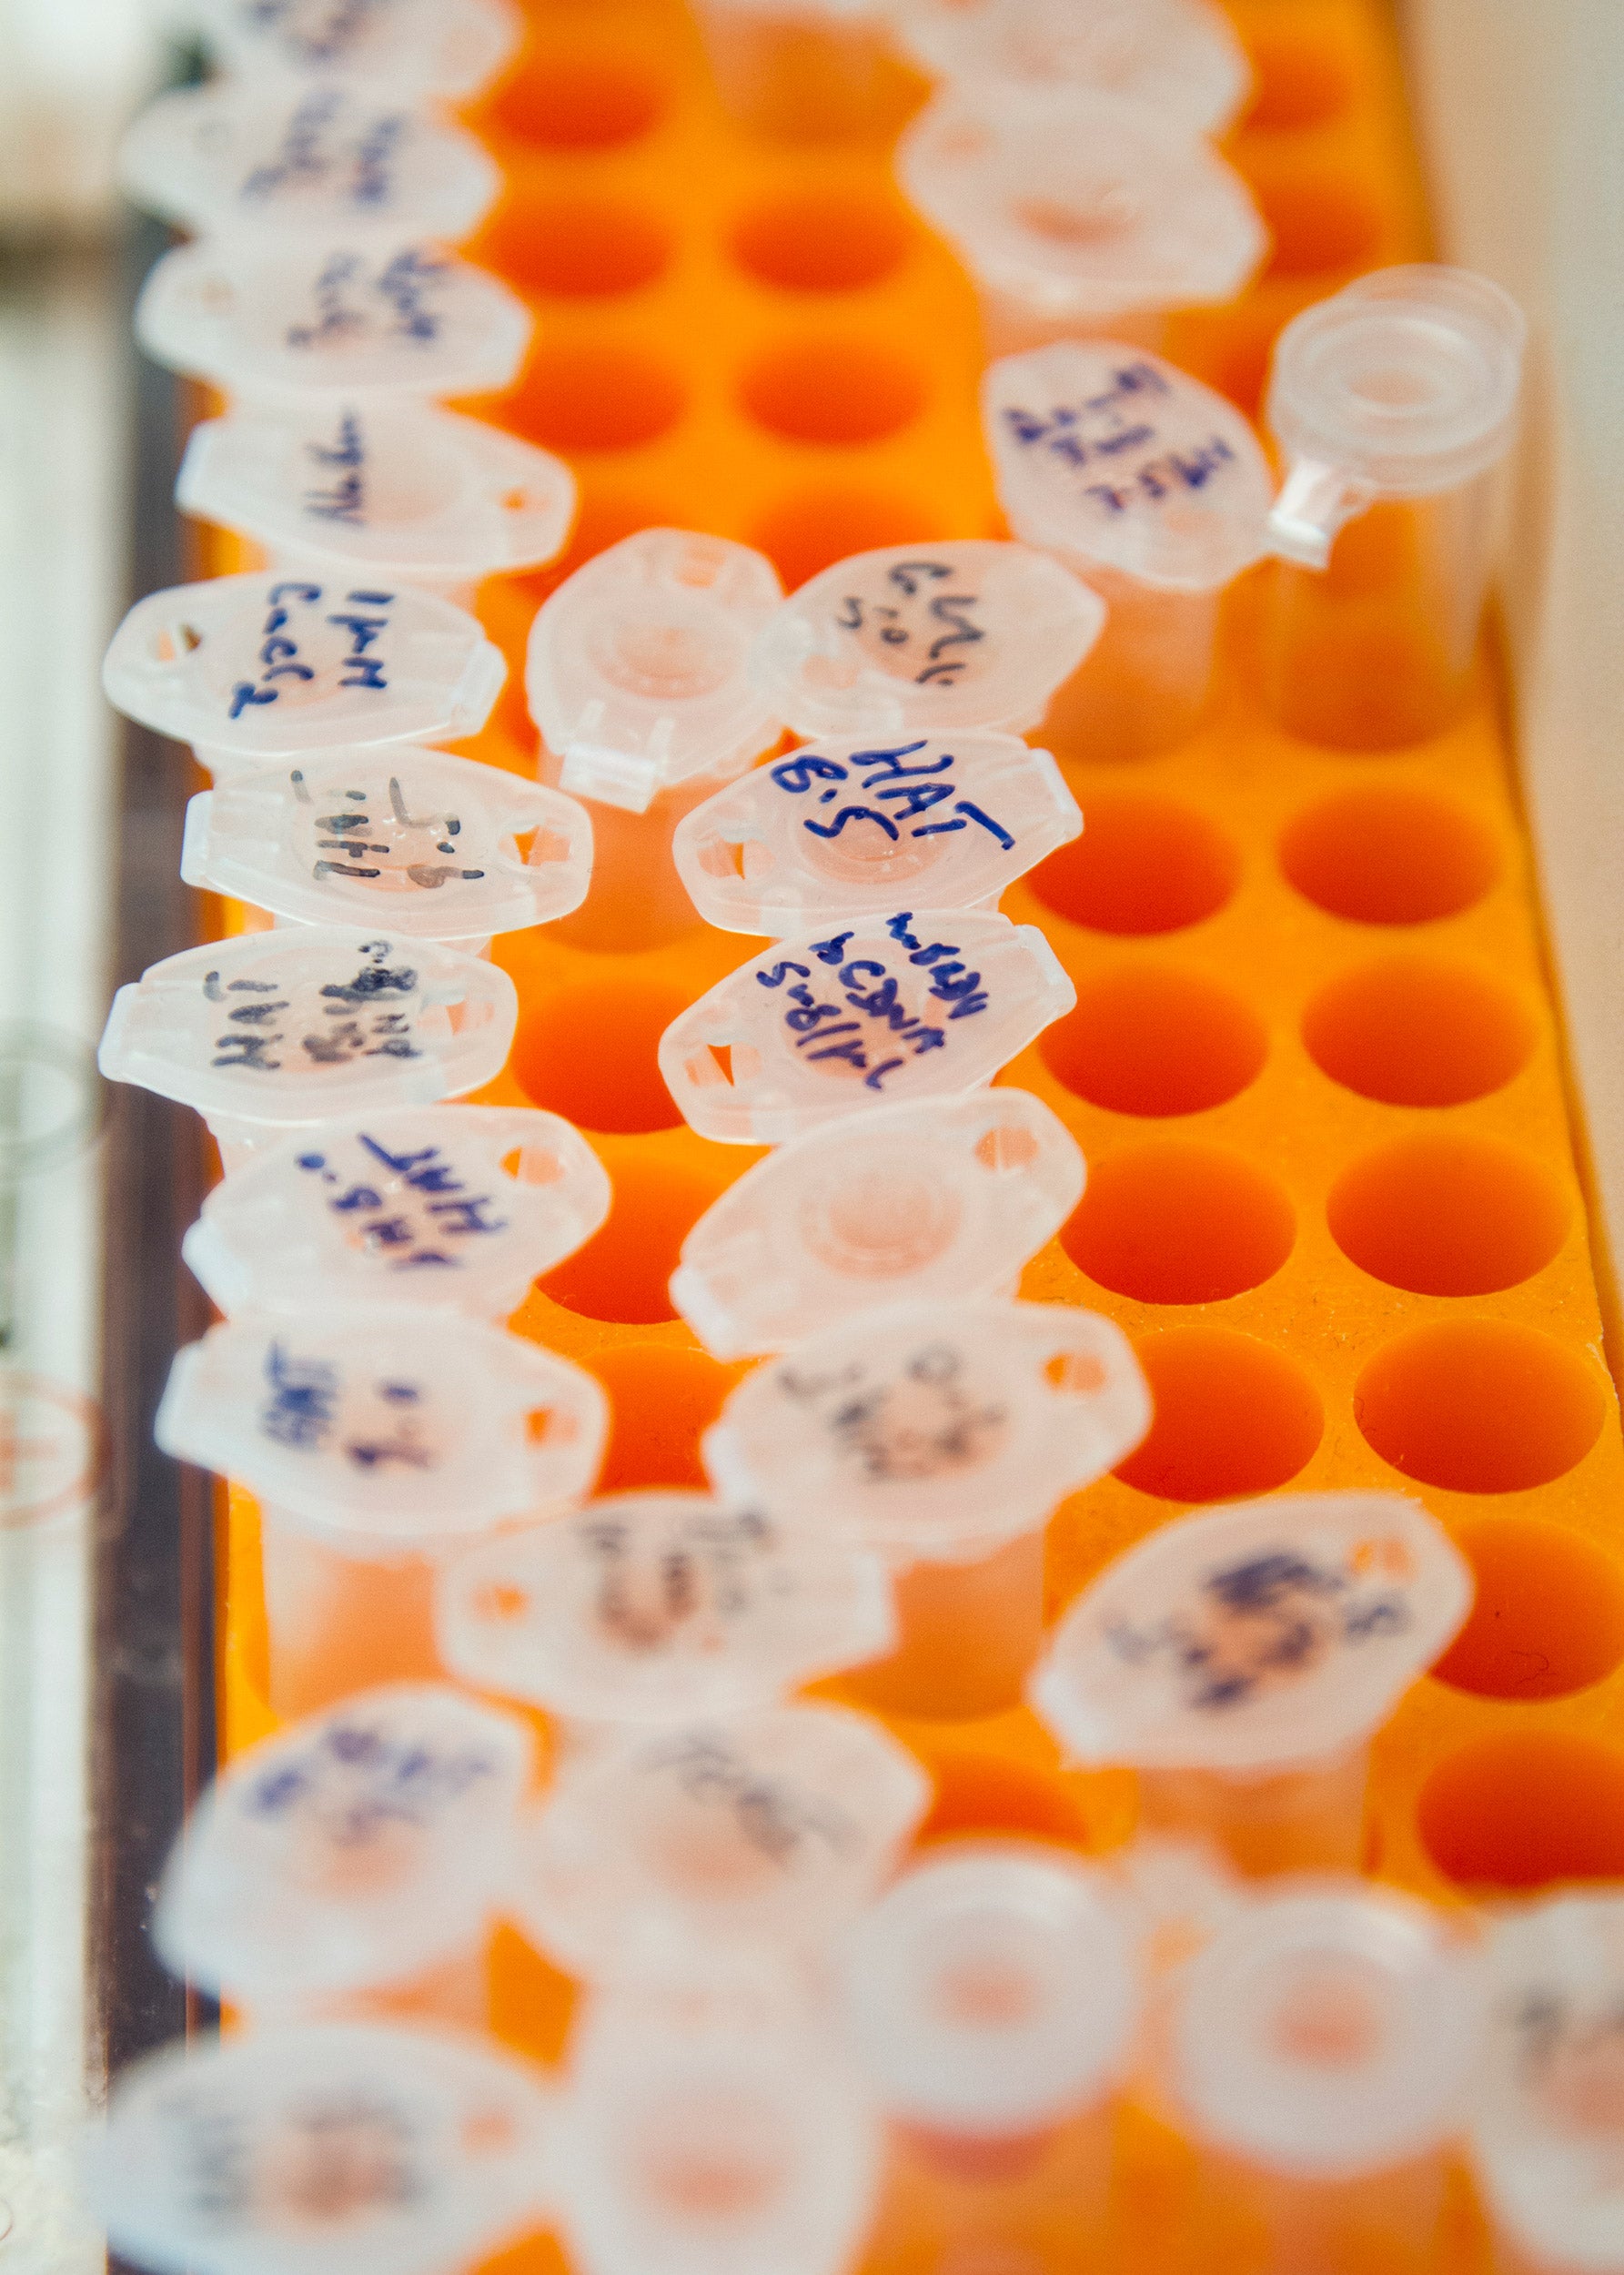 Microcentrifuge tubes in a rack.